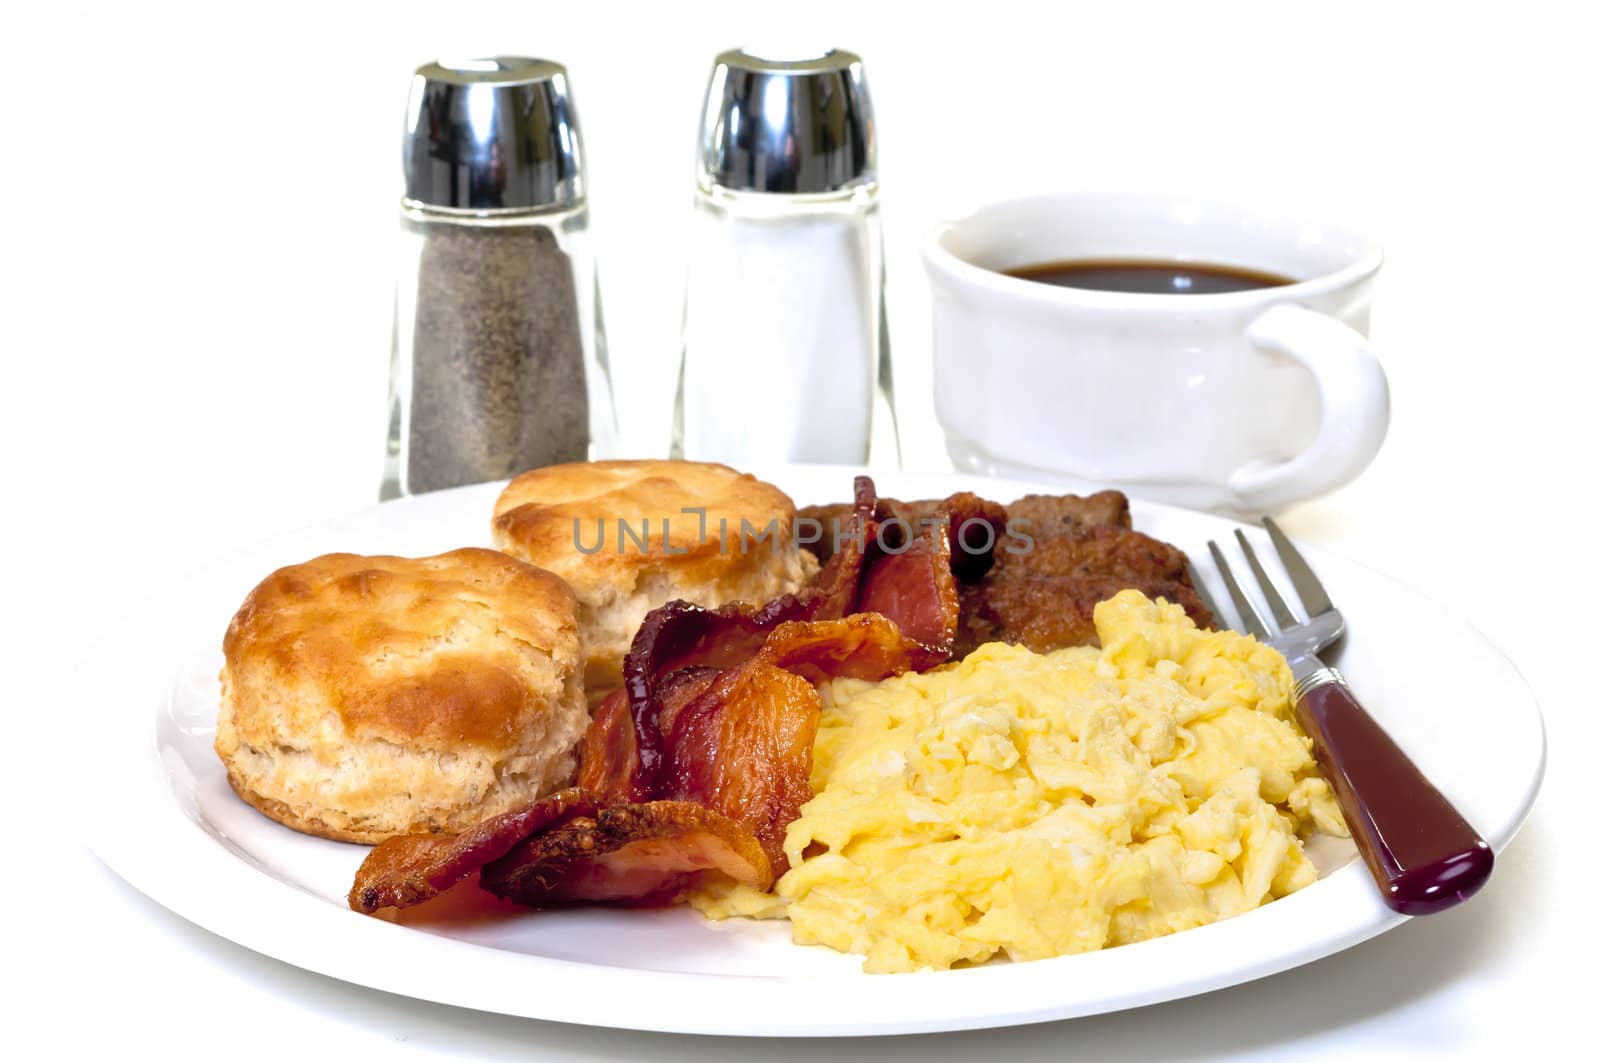 Big country breakfast with scrambled eggs, bacon, sausage, buttermilk biscuits, and coffee.  Salt and pepper shakers in background.  Isolated on white background.